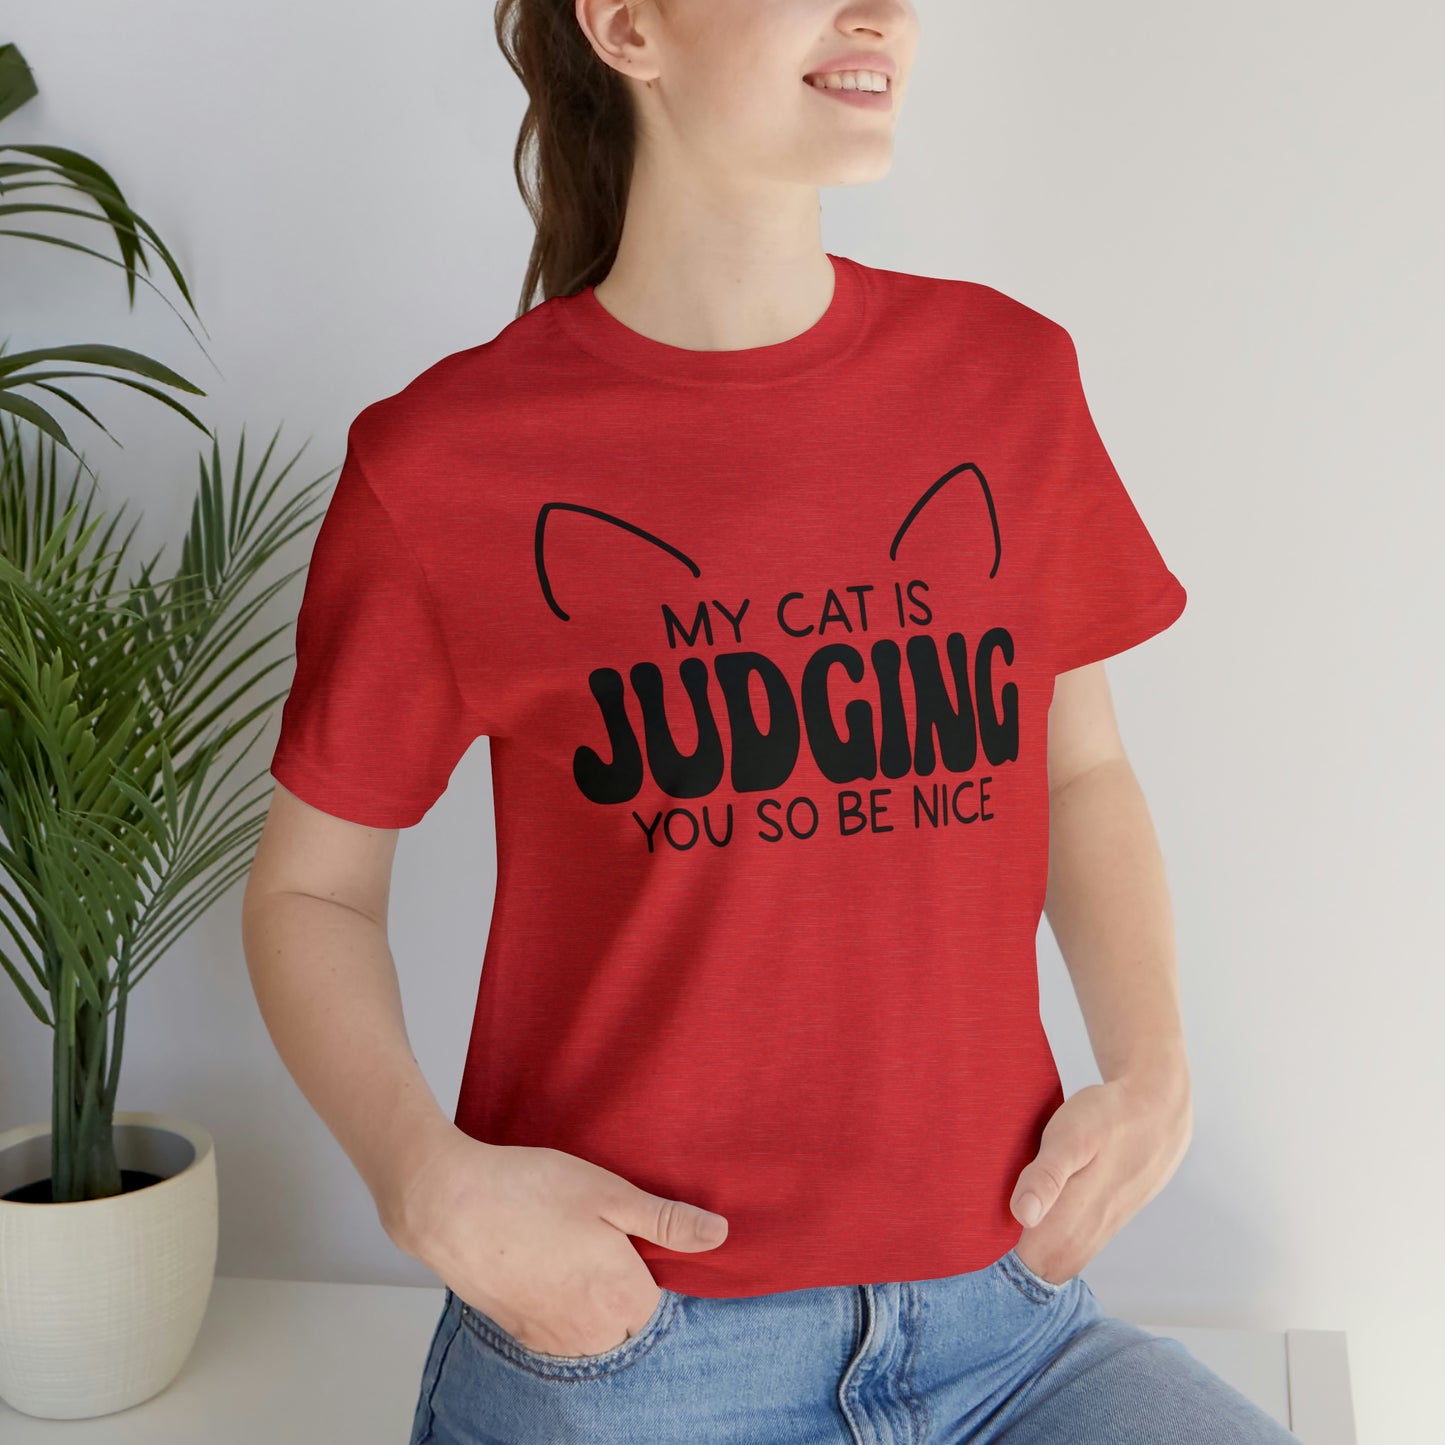 My Cat is Judging You So Be Nice Short Sleeve T-shirt